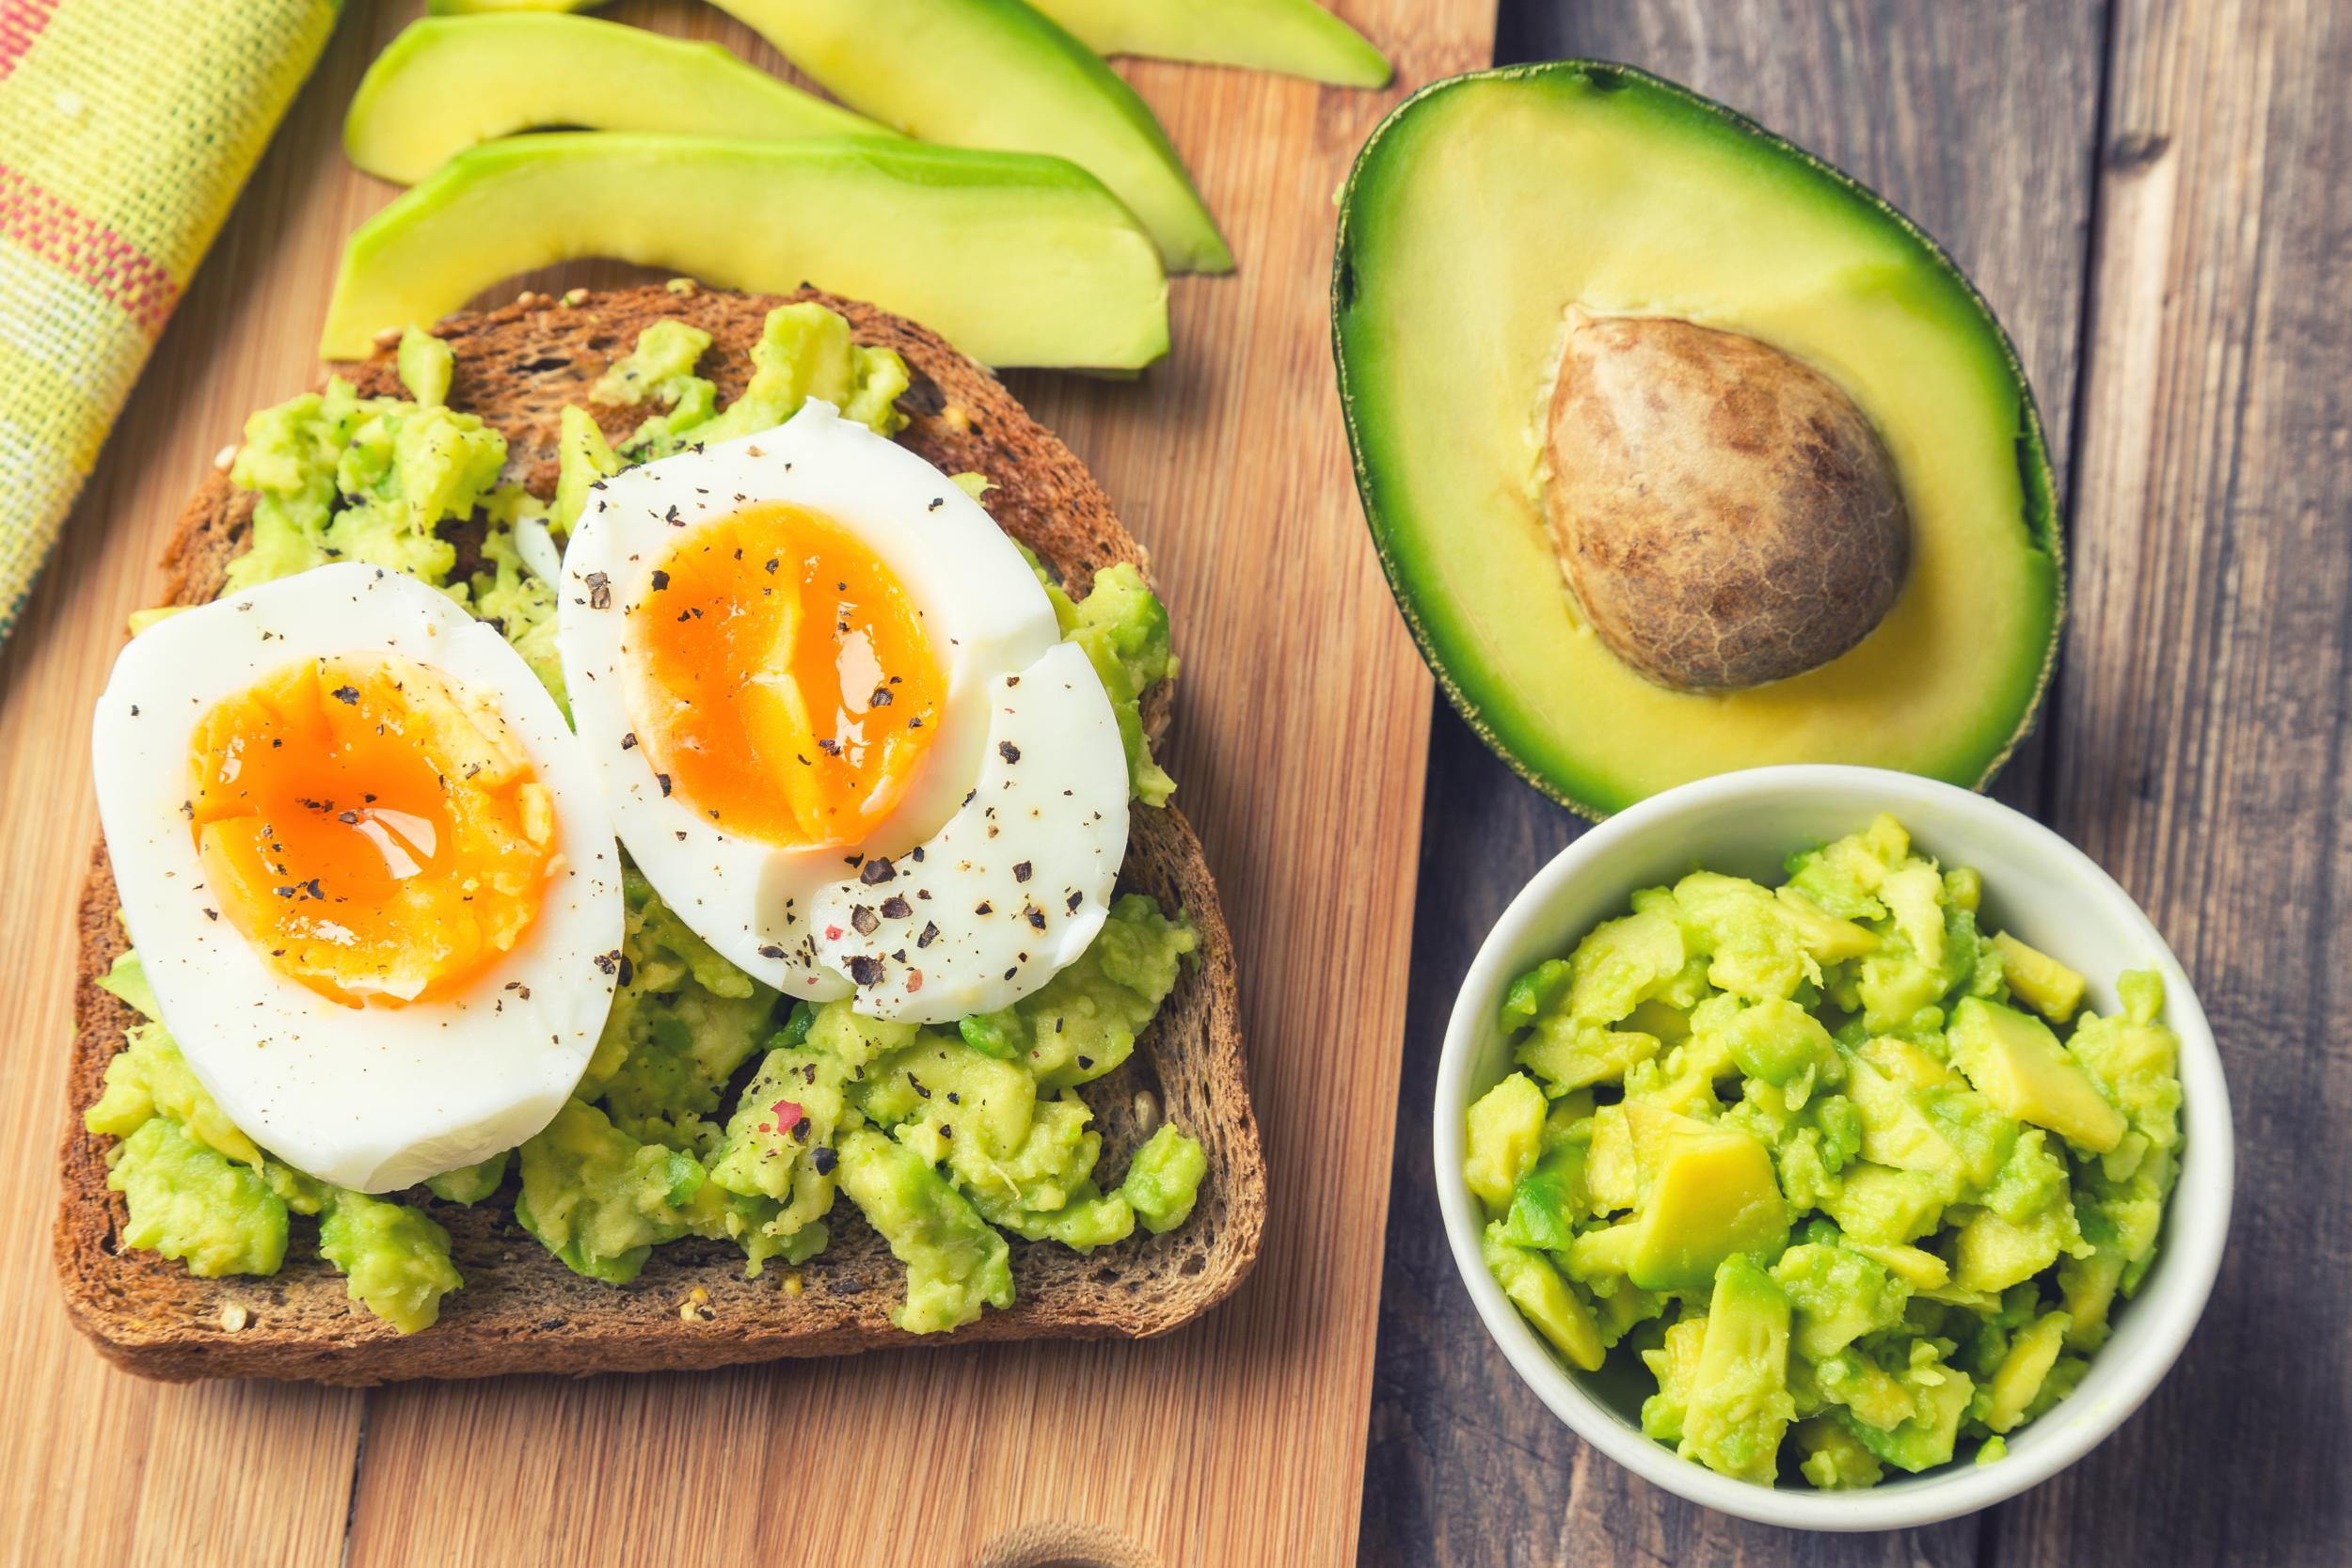 Avocados could be the key to shifting the pounds from your belly